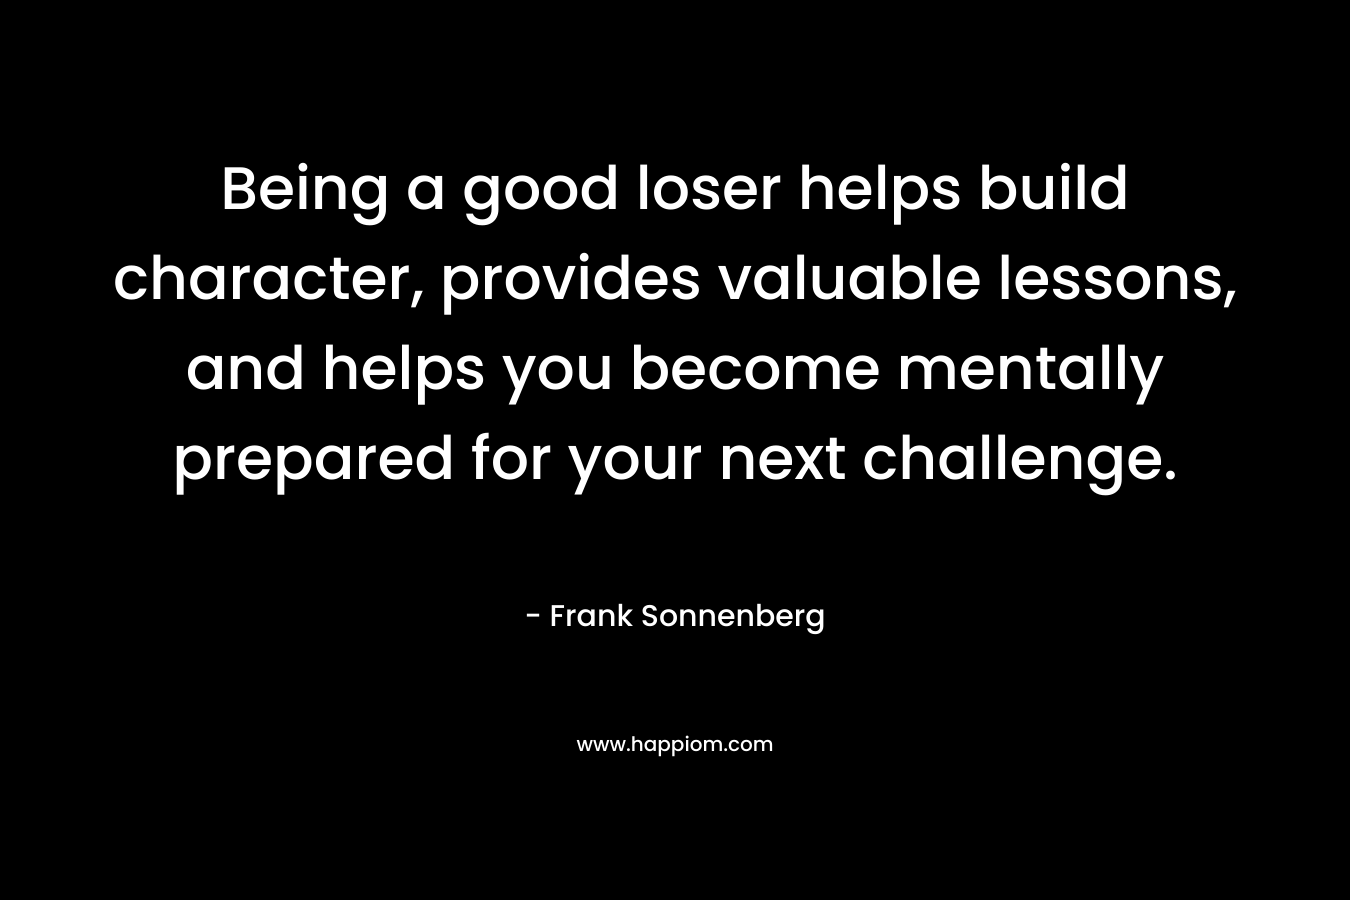 Being a good loser helps build character, provides valuable lessons, and helps you become mentally prepared for your next challenge.